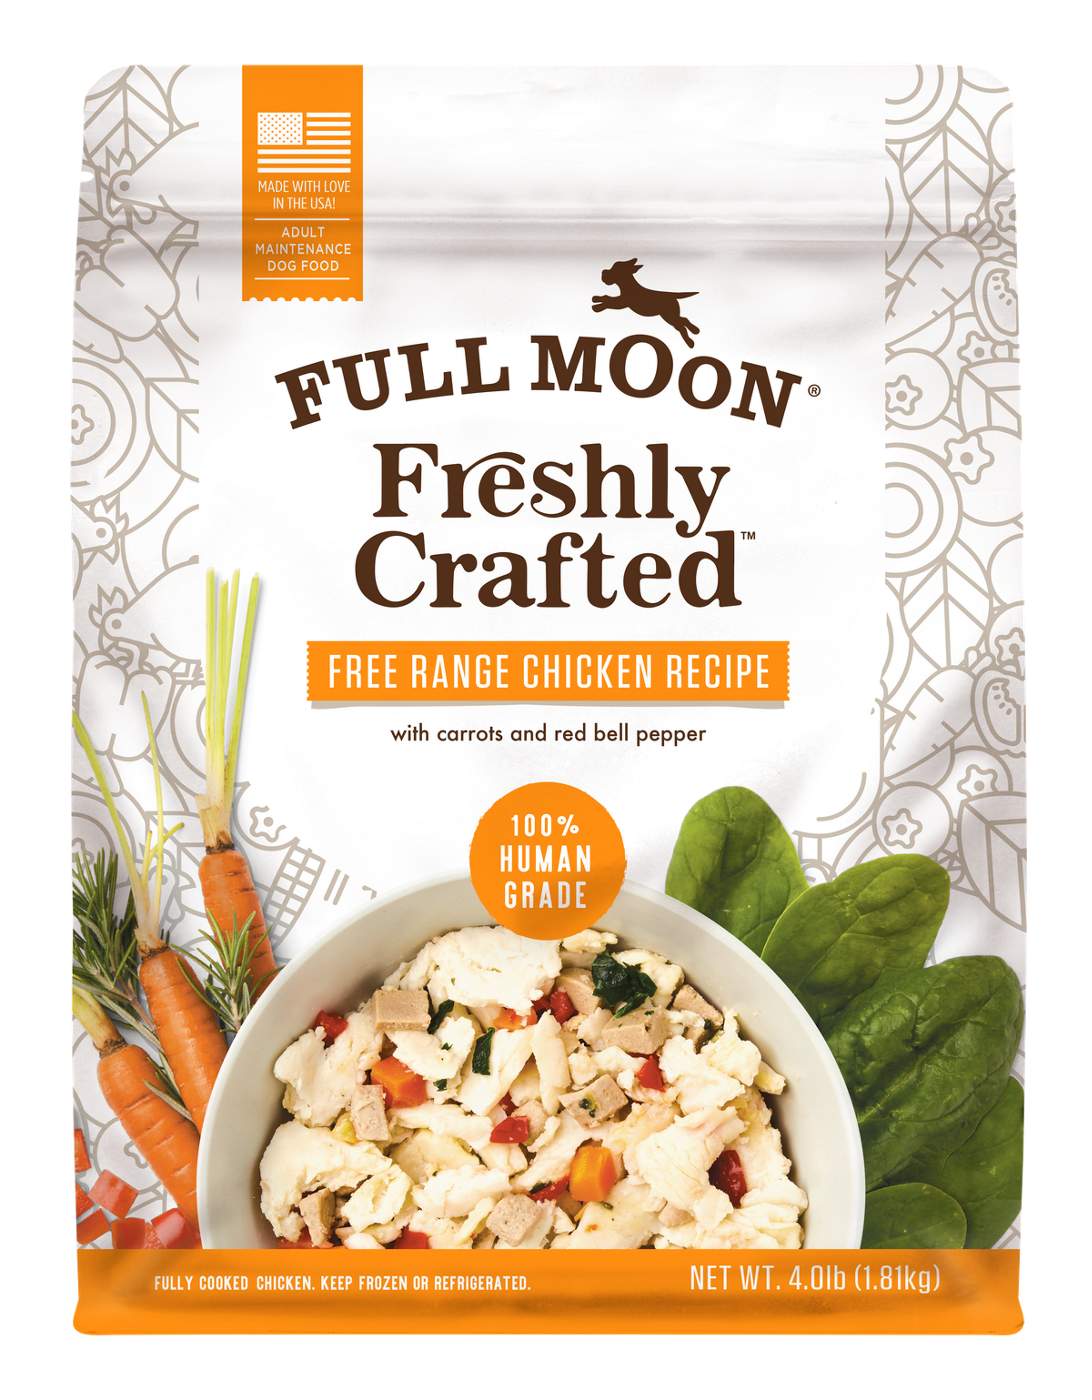 Full Moon Freshly Crafted Free Range Chicken Wet Dog Food; image 1 of 2